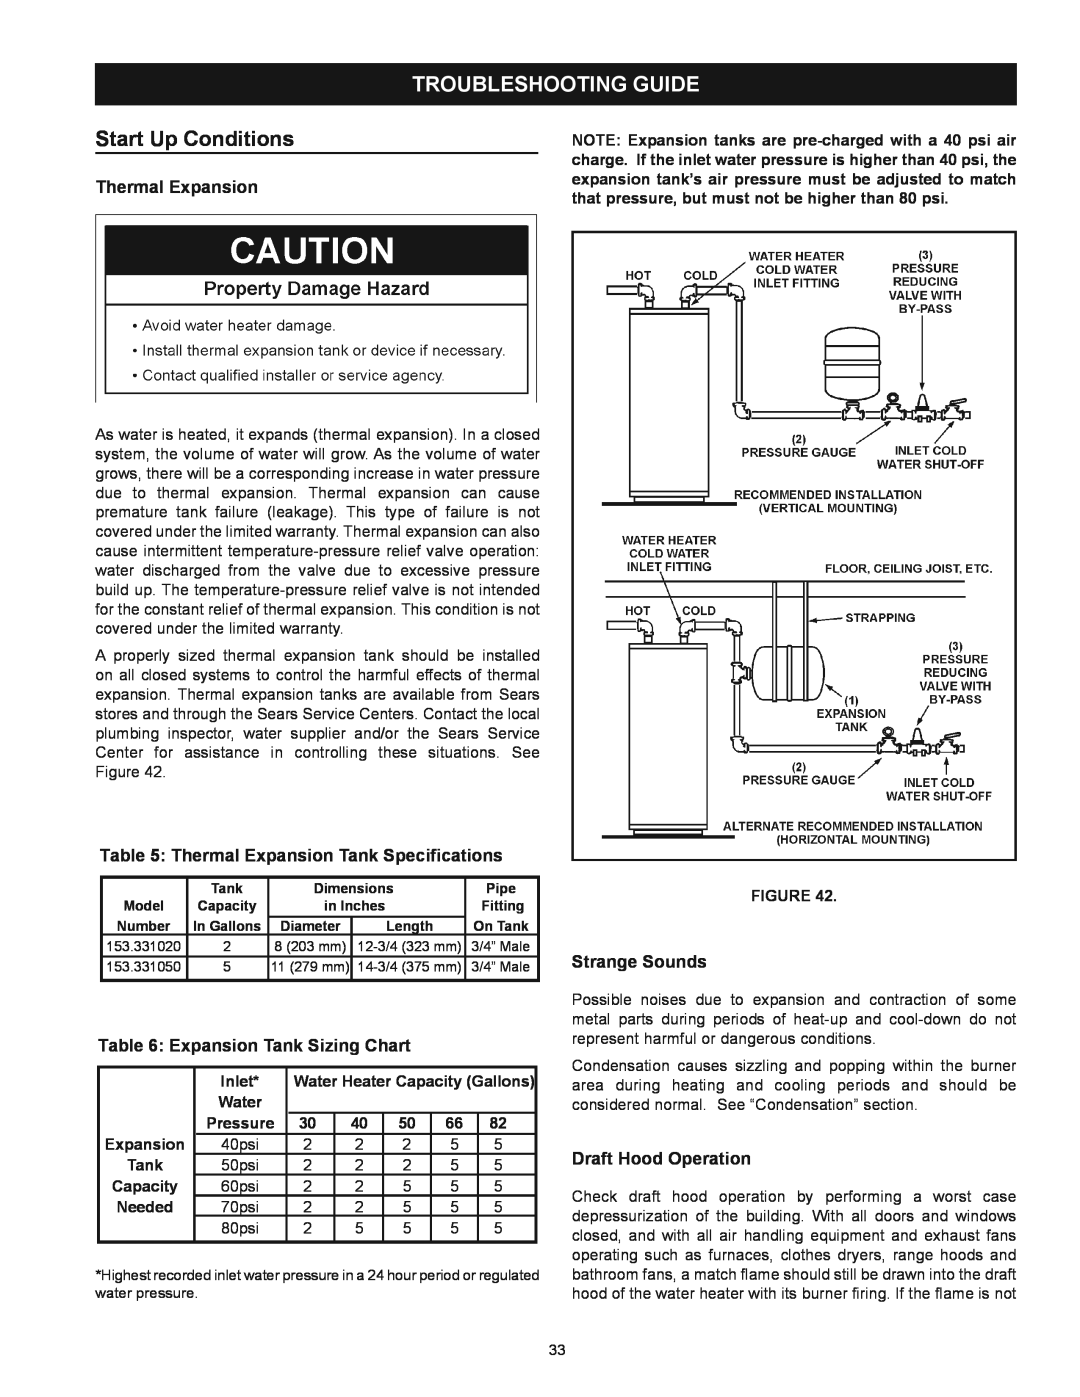 Kenmore 153.336472 Troubleshooting Guide, Start Up Conditions, Inlet, Water Heater Capacity Gallons, Expansion, Pressure 